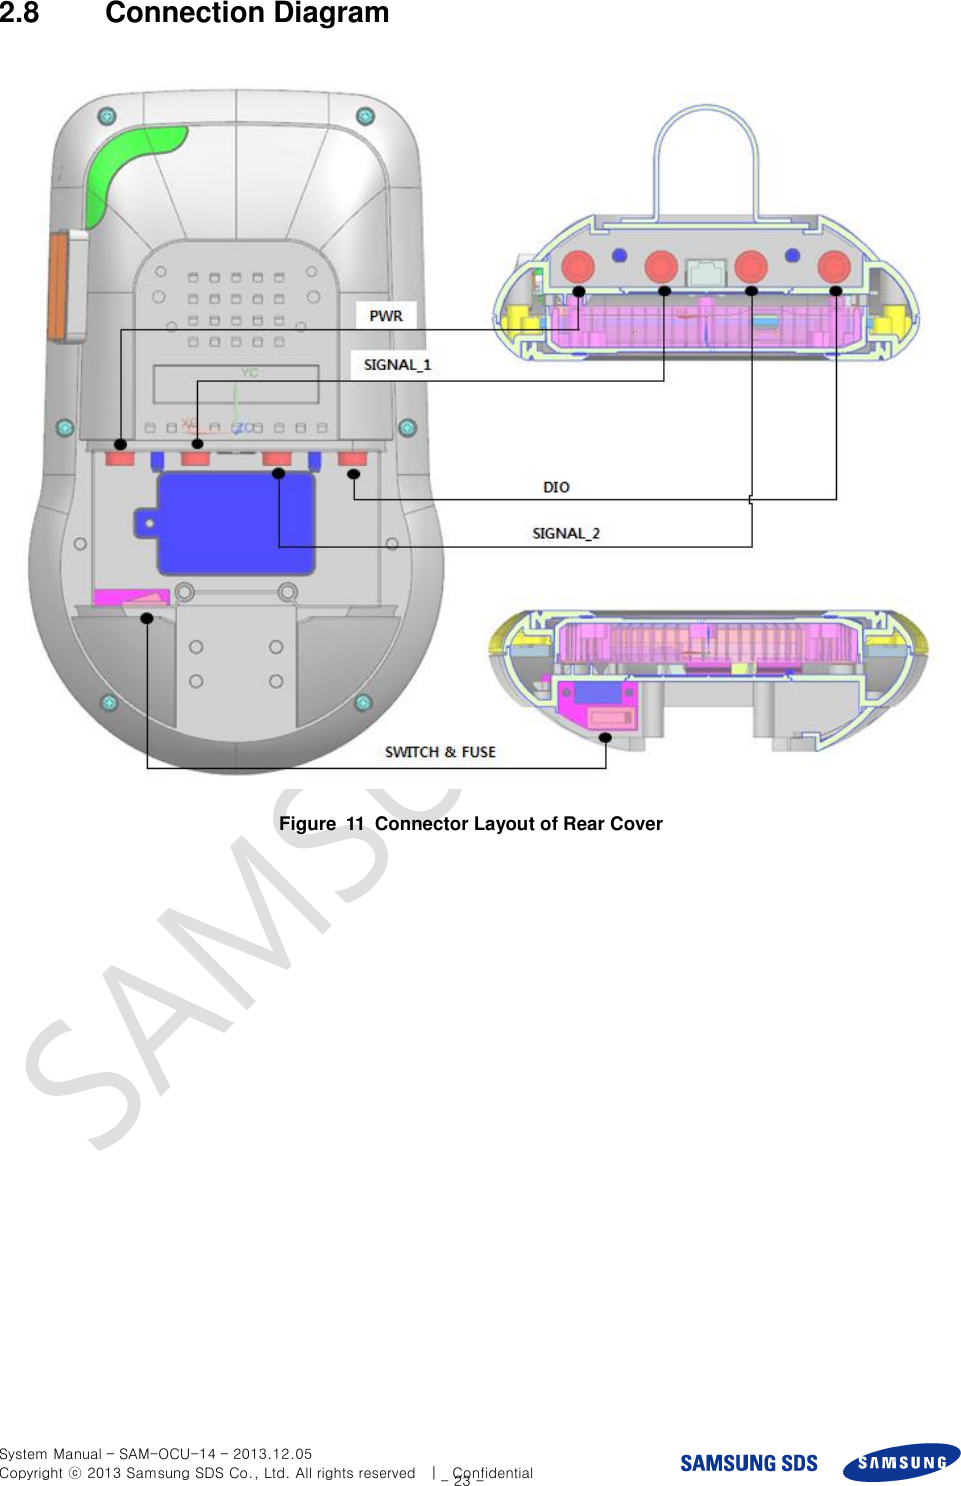  System Manual – SAM-OCU-14 – 2013.12.05 Copyright ⓒ 2013 Samsung SDS Co., Ltd. All rights reserved    |    Confidential - 23 - 2.8  Connection Diagram  Figure  11  Connector Layout of Rear Cover 